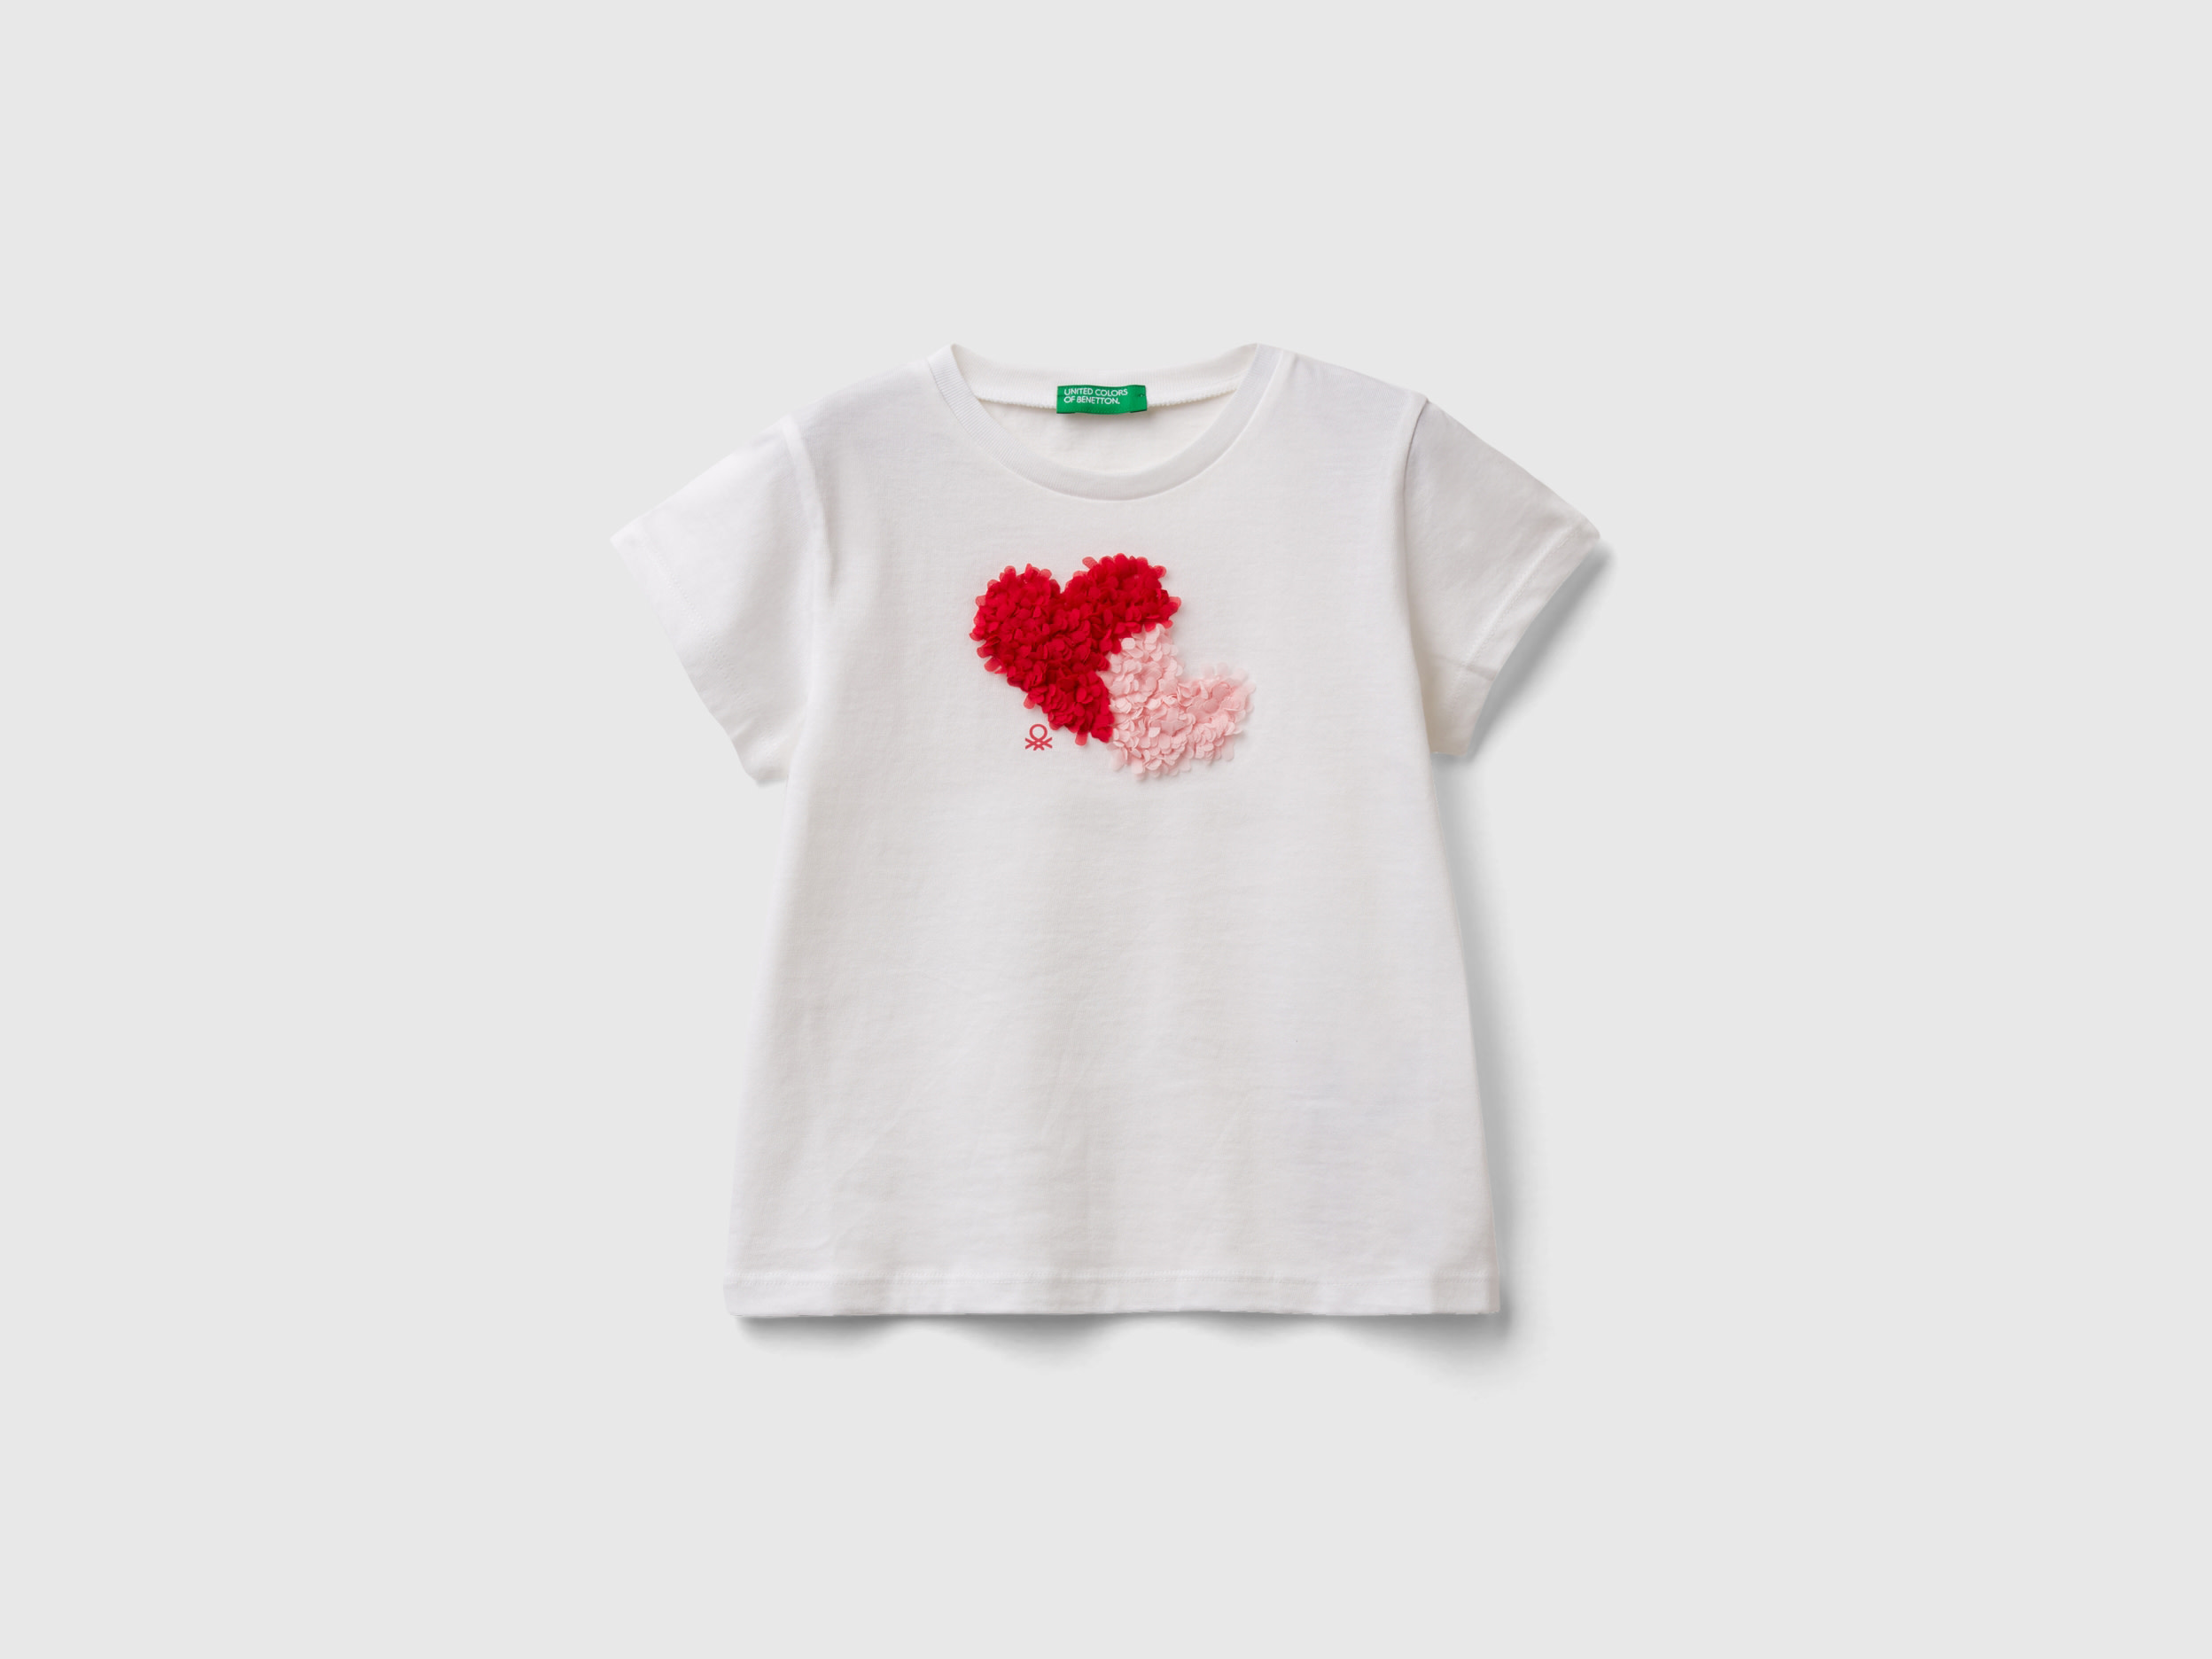 Image of Benetton, T-shirt With Petal Effect Applique, size 104, White, Kids